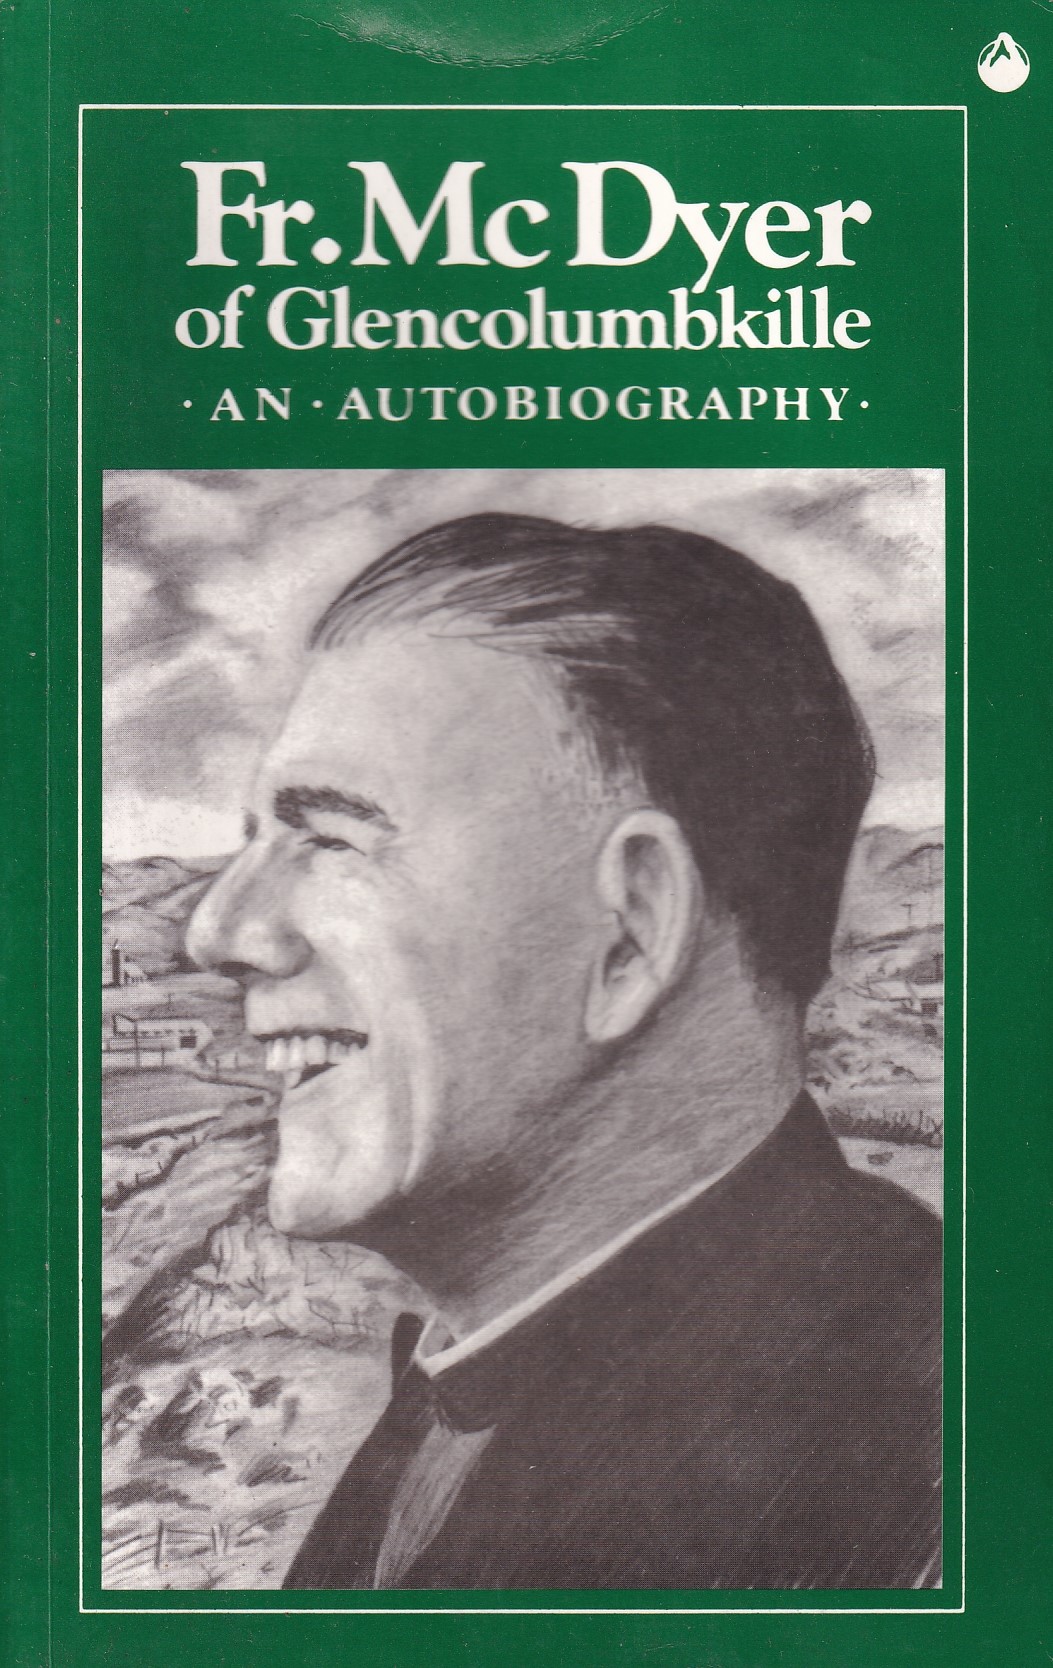 Father McDyer of Glencolumbkille: An Autobiography | Fr. James McDyer | Charlie Byrne's